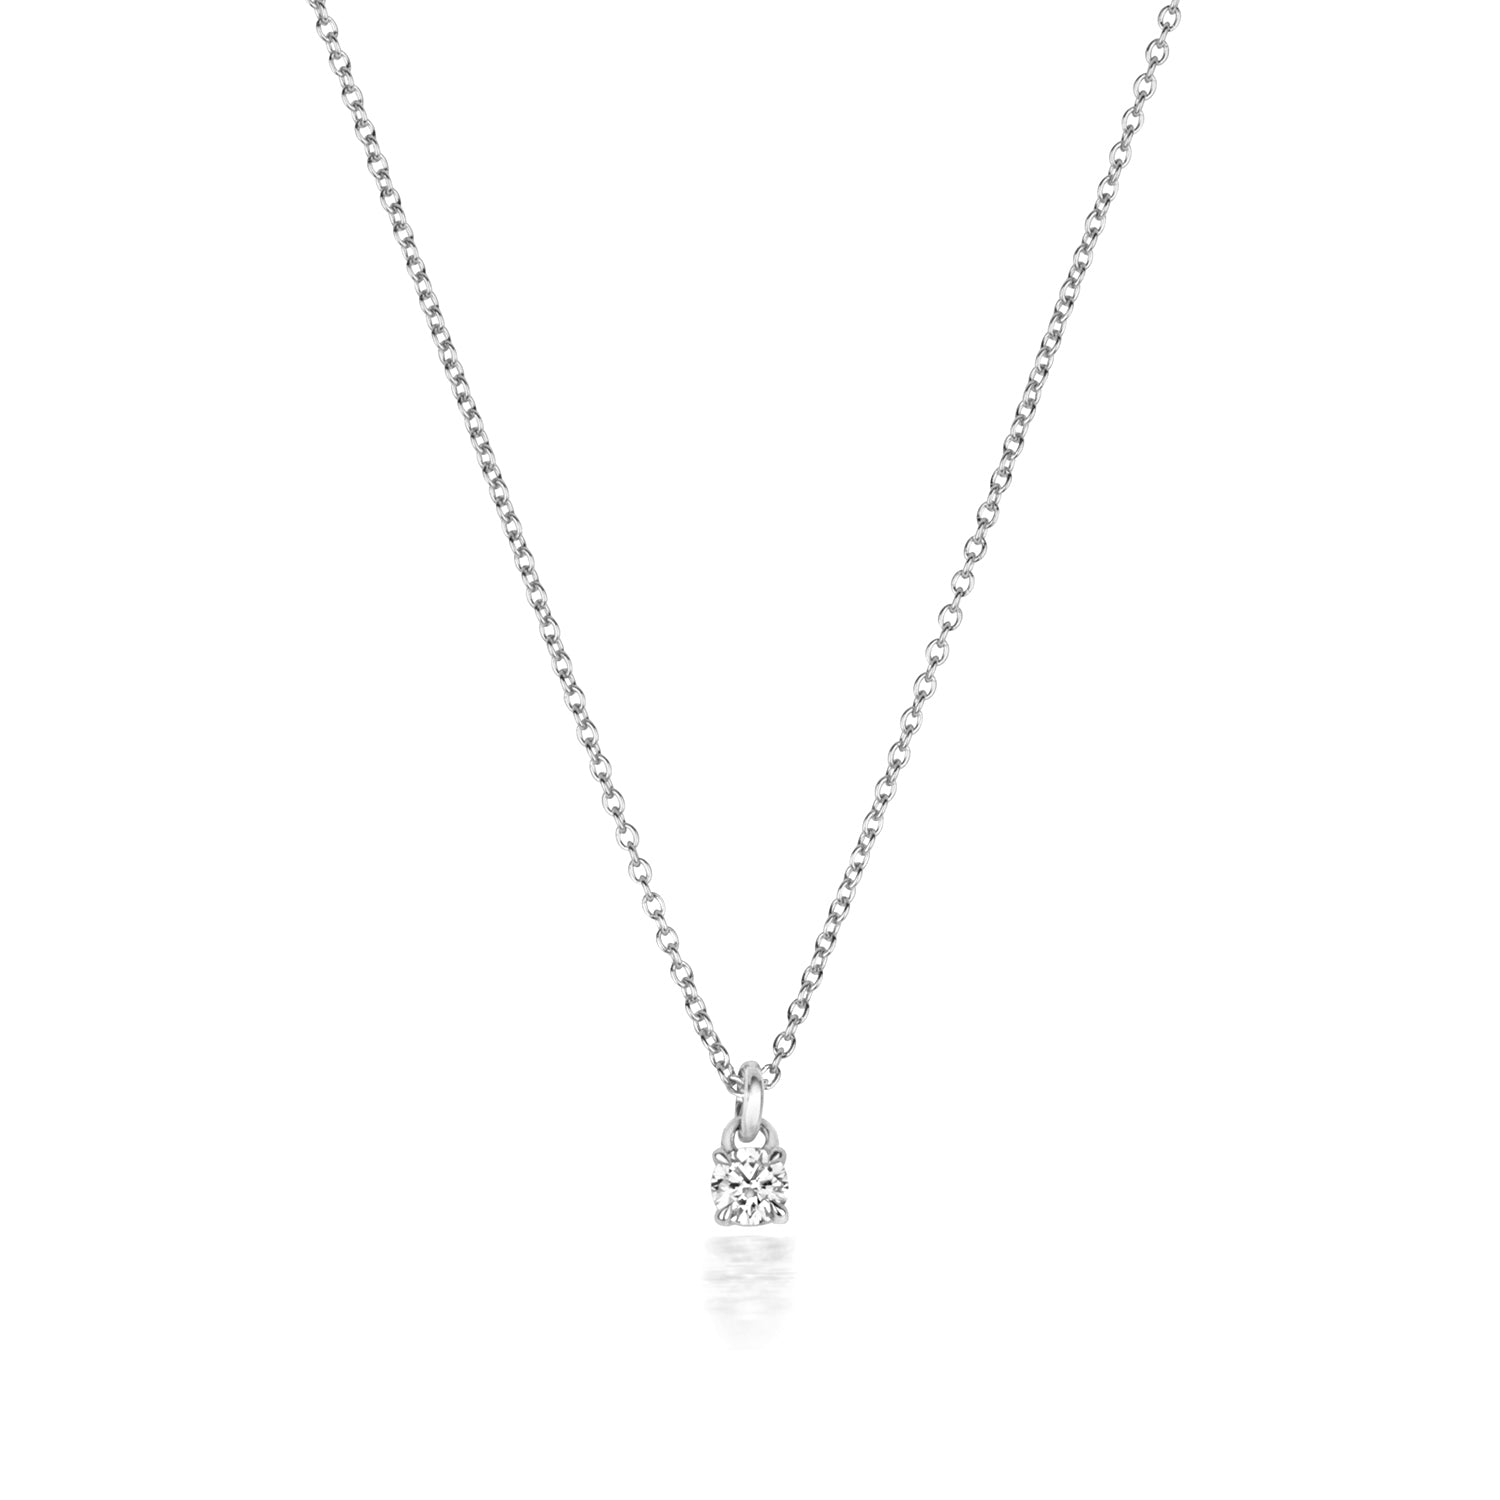 DIAMOND 4 CLAW NECKLACE IN 18 CT WHITE GOLD